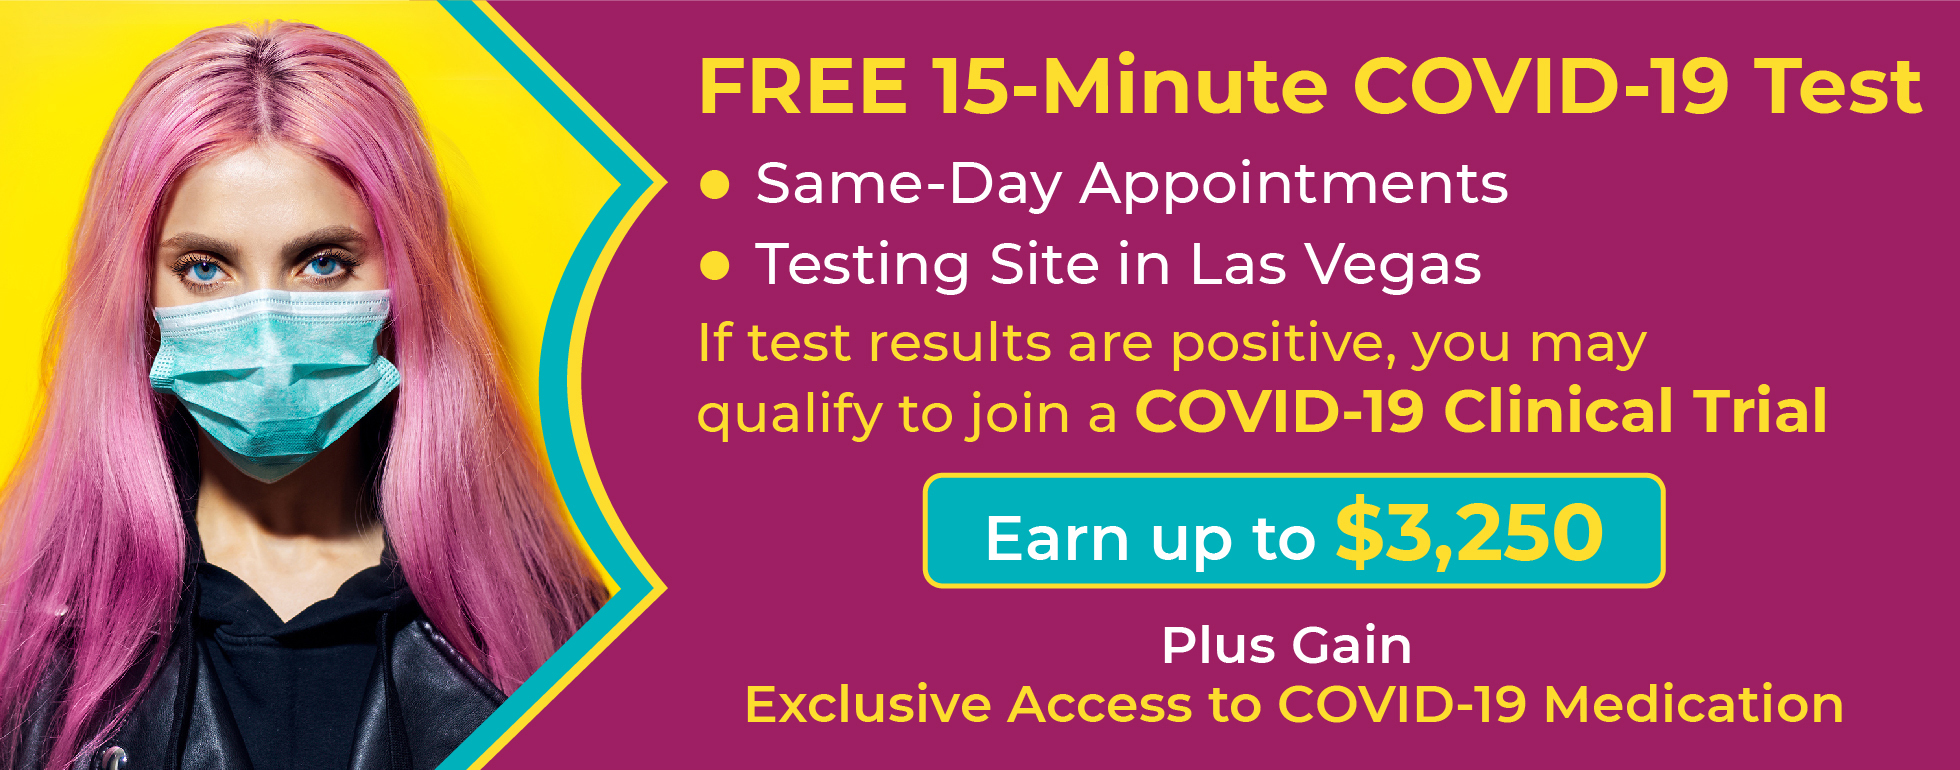 free rapid covid testing near me today